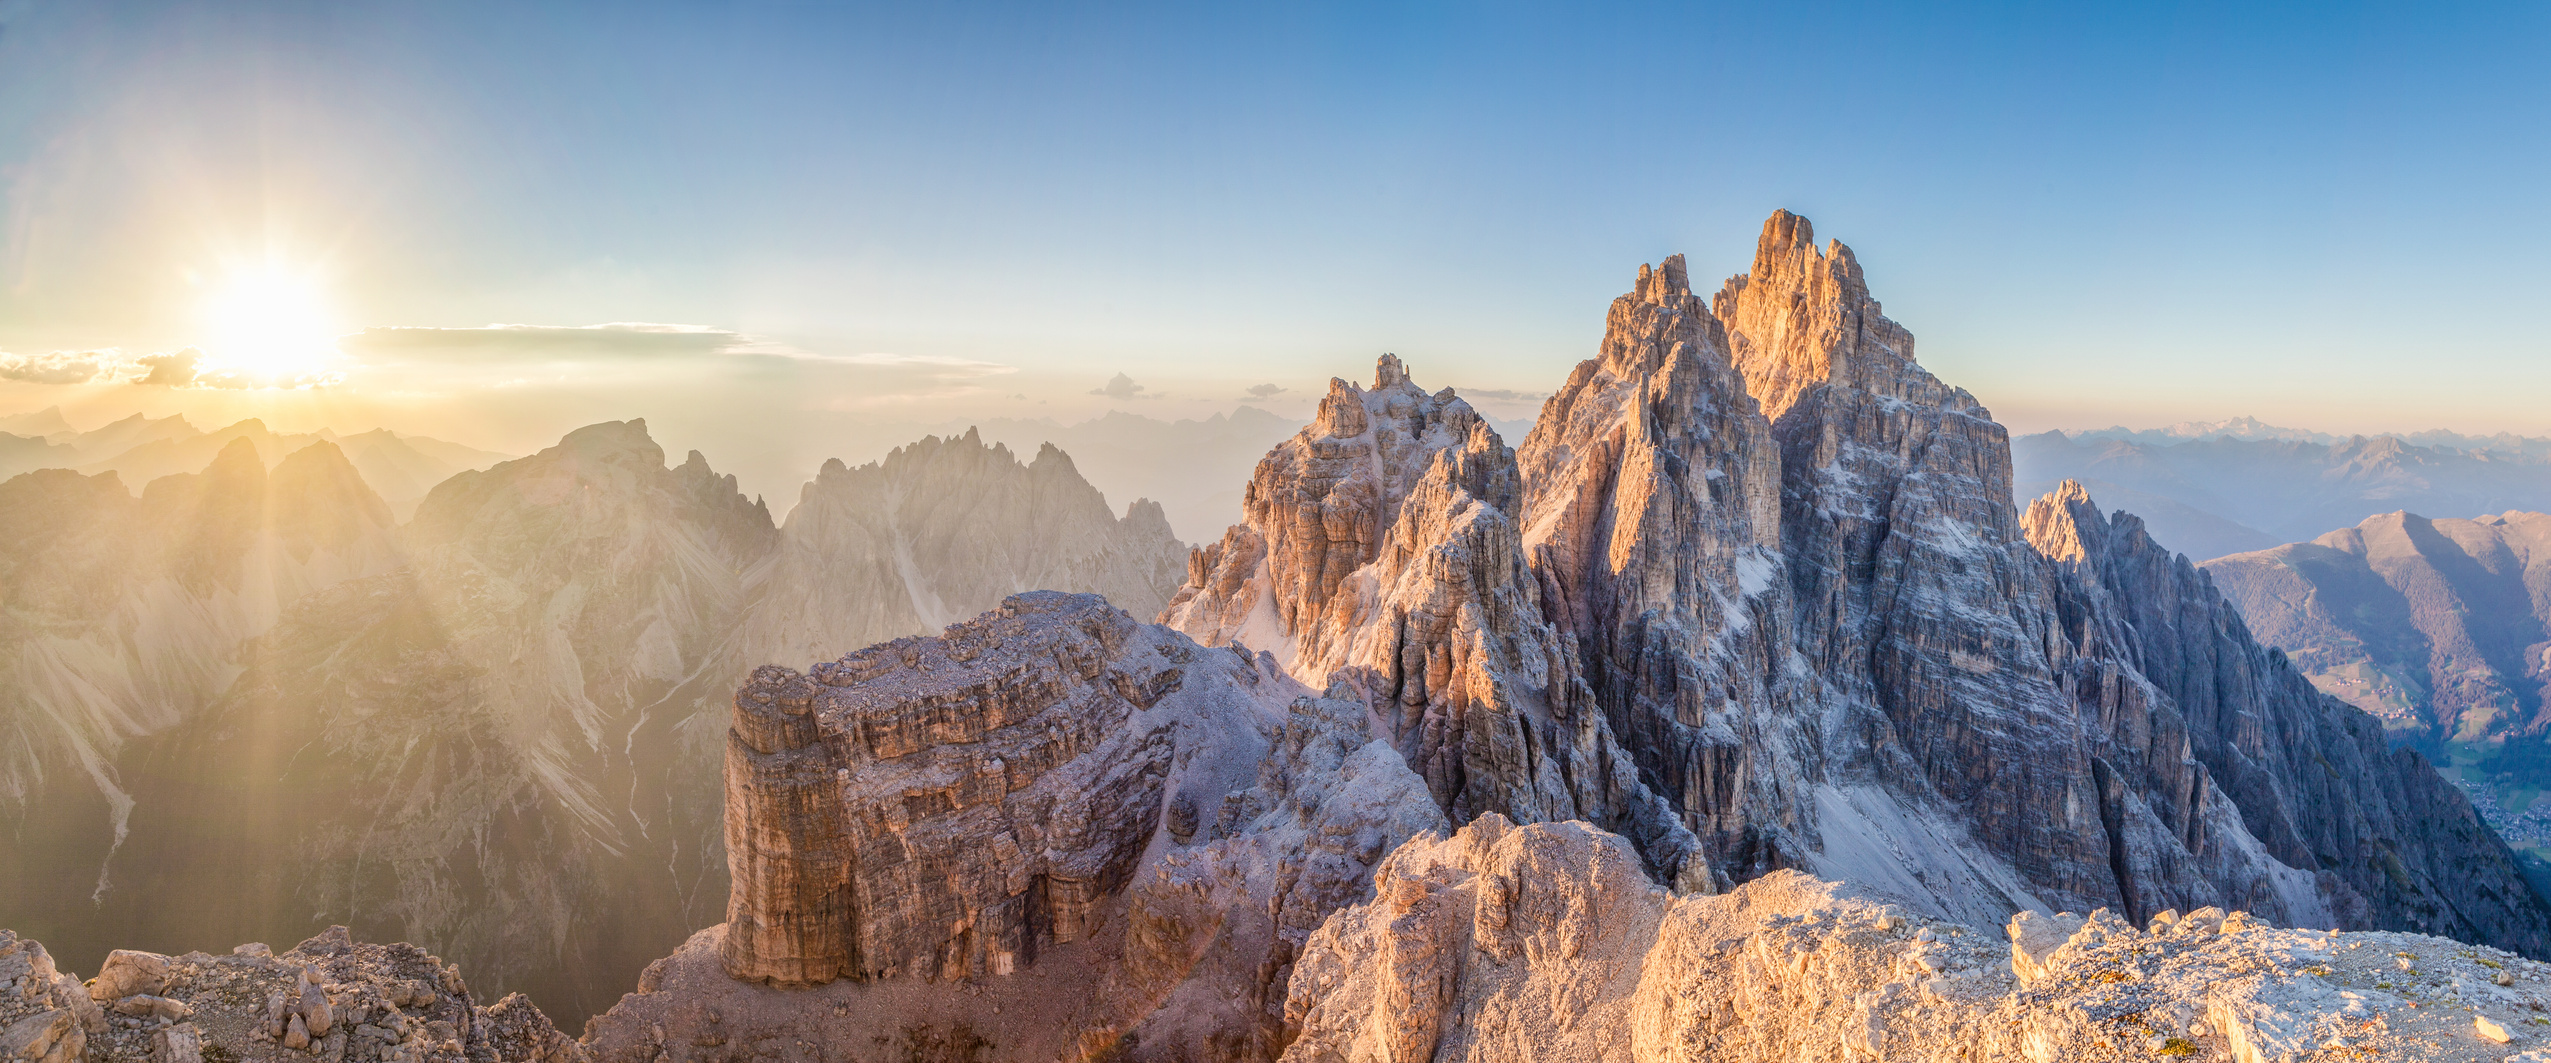 Dolomites mountains  at sunset, South Tyrol, Italy